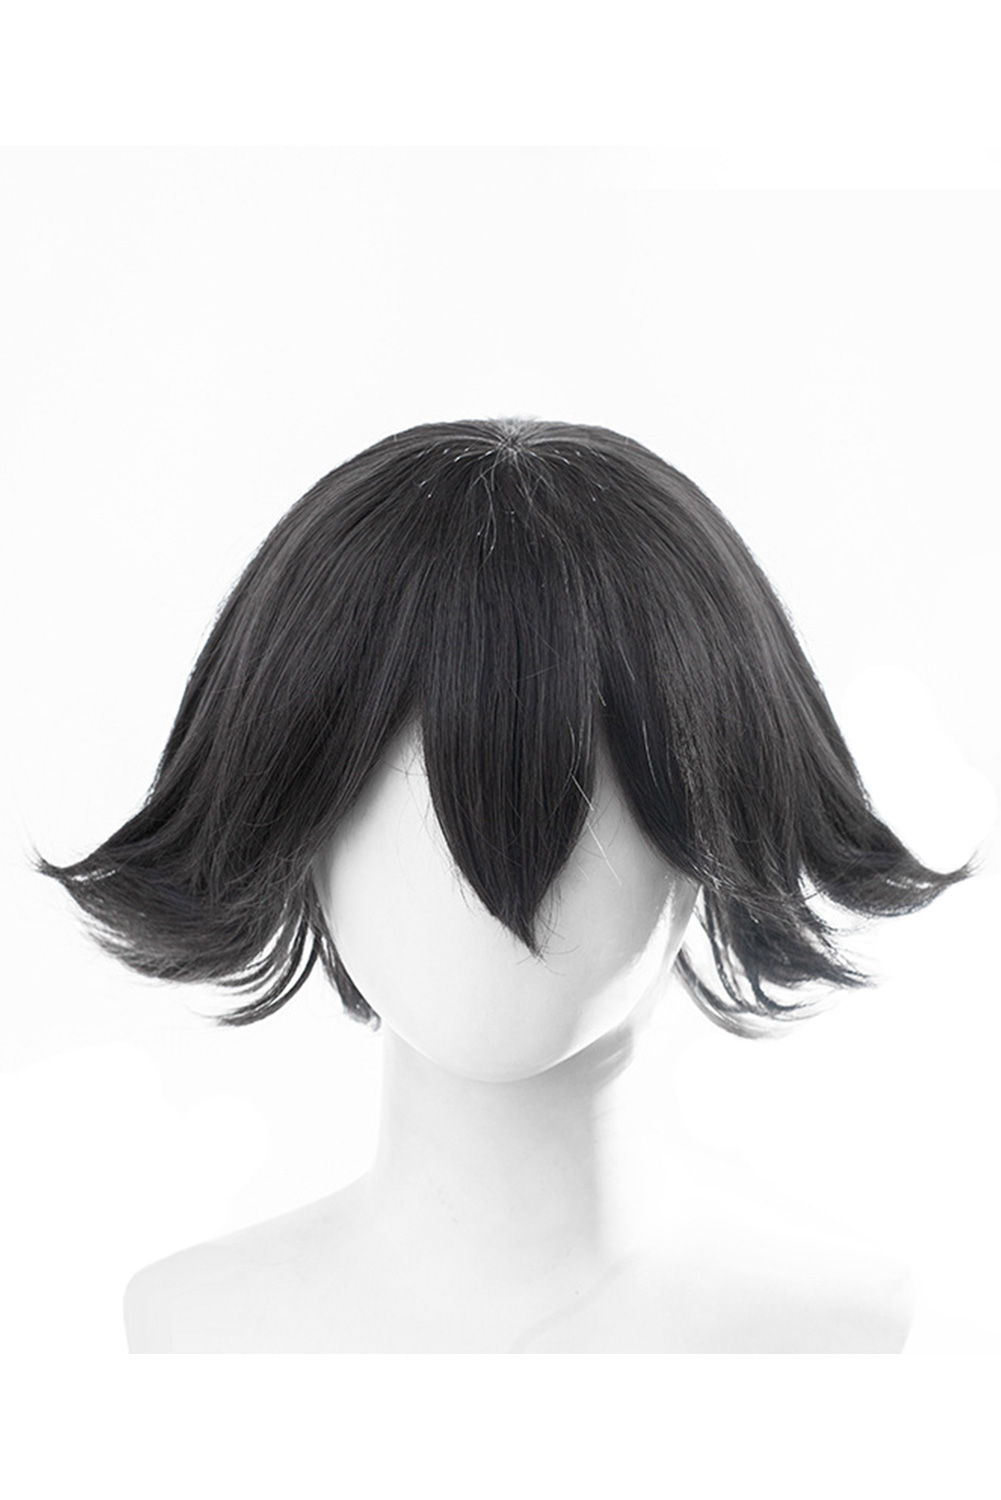 Anime Bungo Stray Dogs Edogawa Rampo Cosplay Wig Heat Resistant Synthetic Hair Halloween Costume Accessories